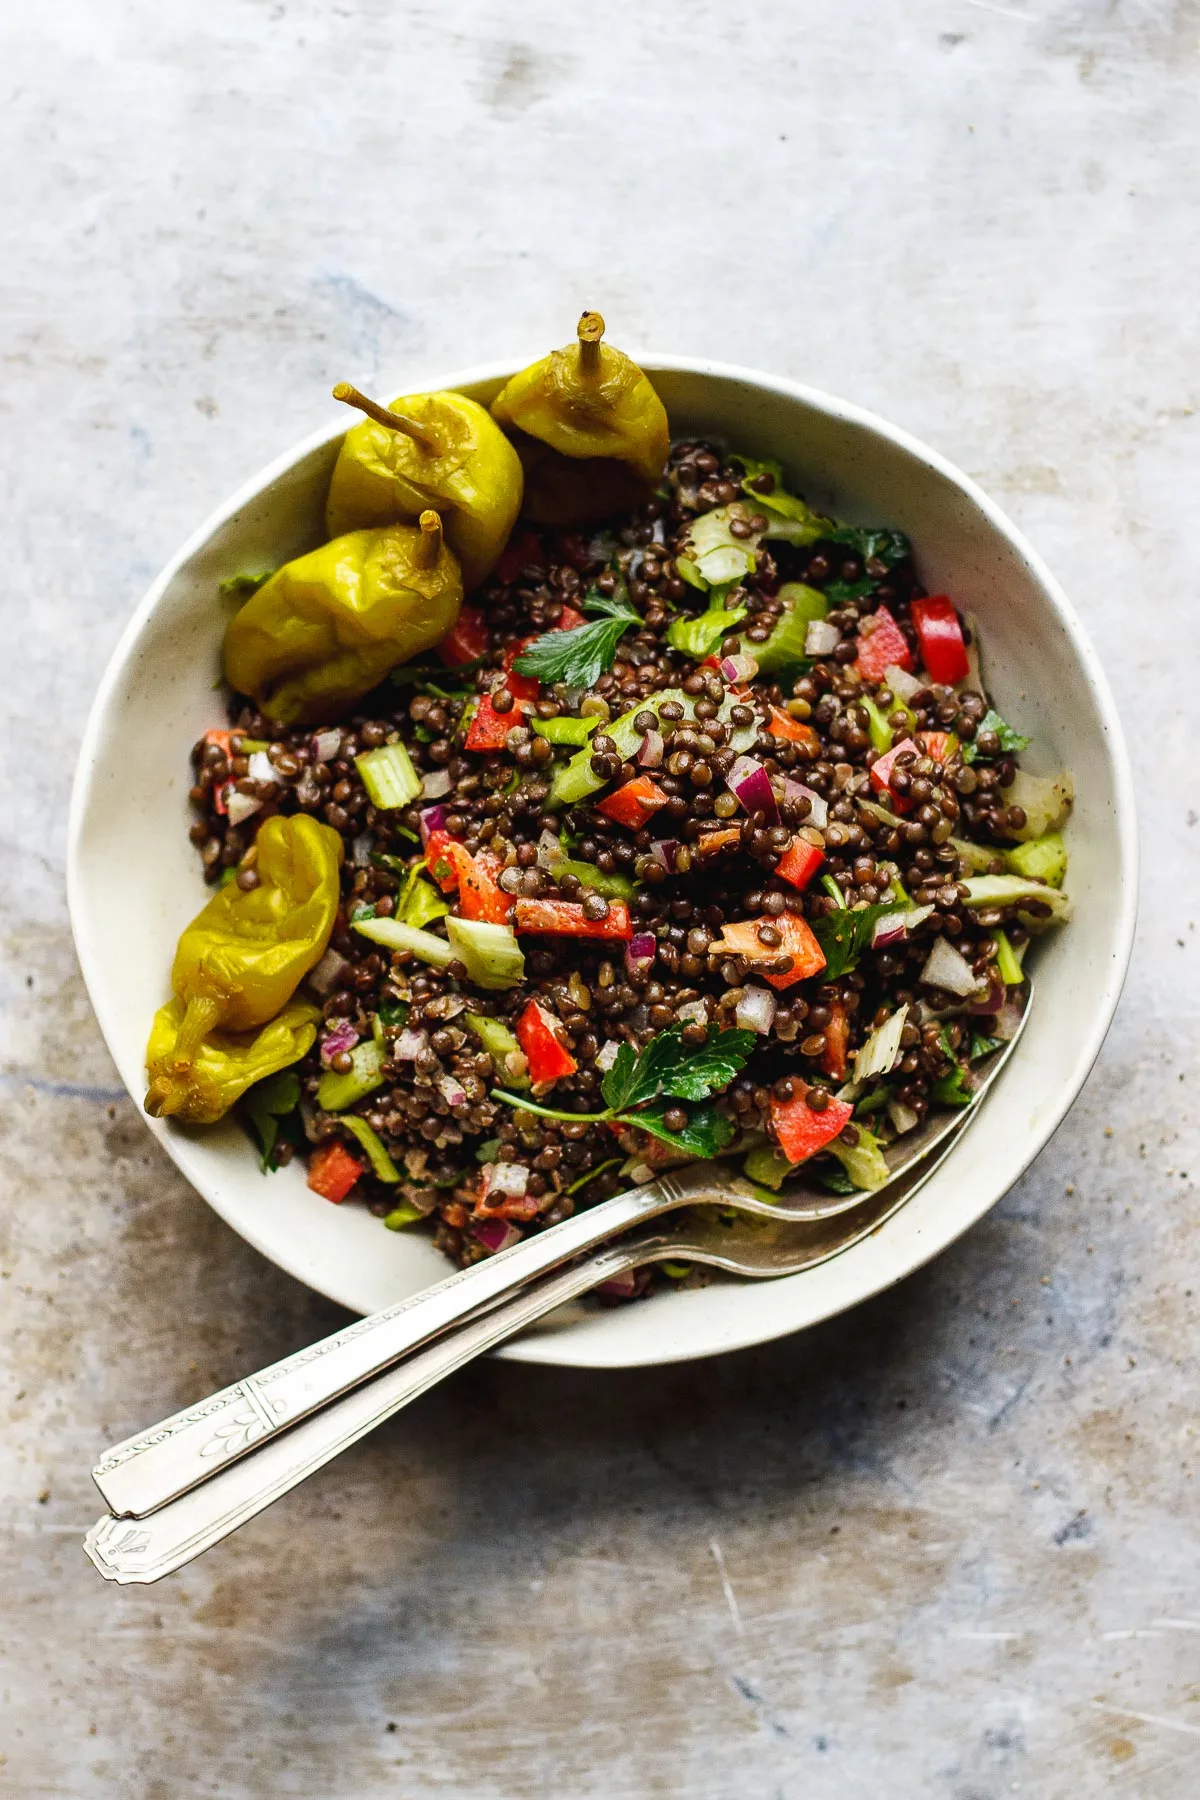 lentils with a pepperoncini salad dressing